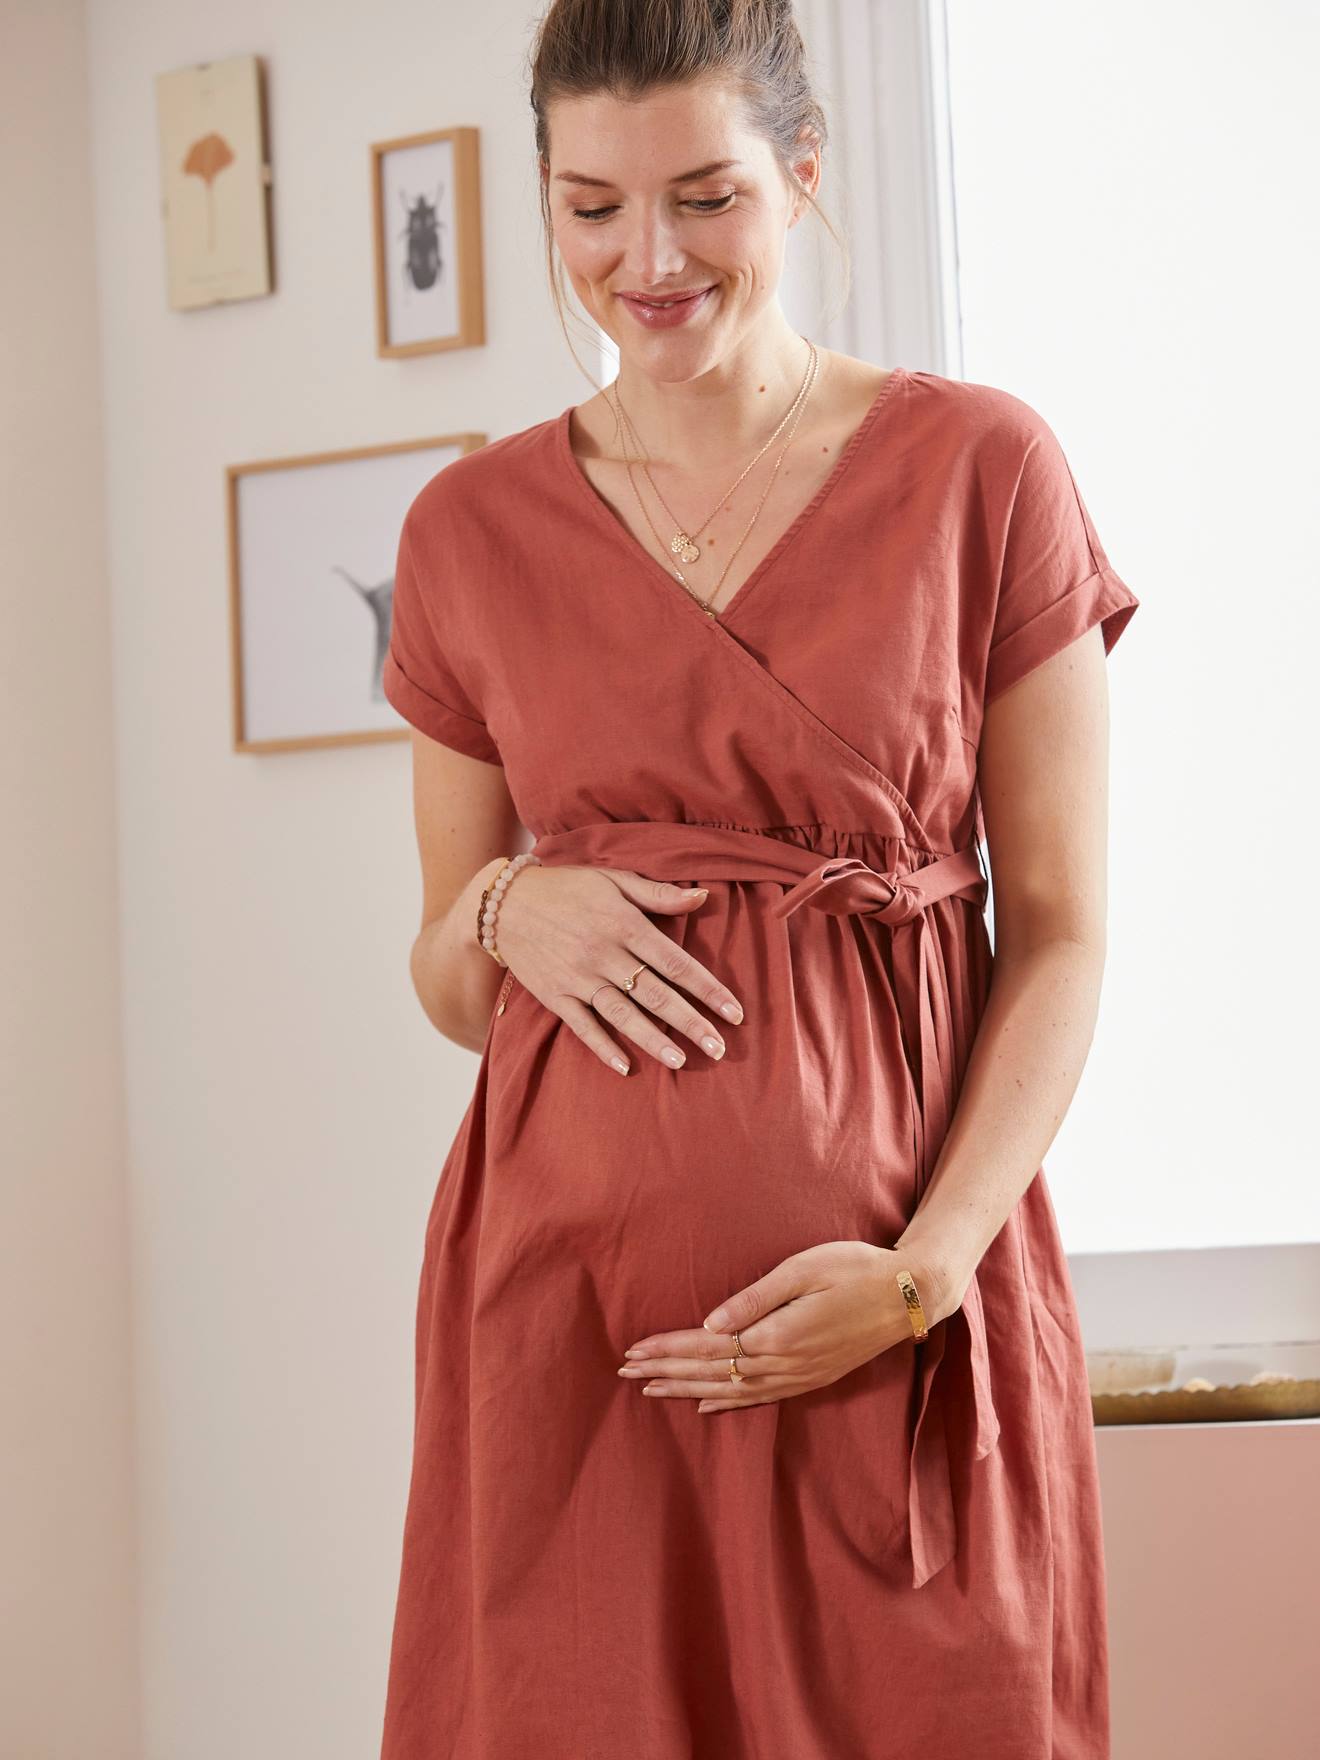 Pregnancy Wear Maternity Clothes